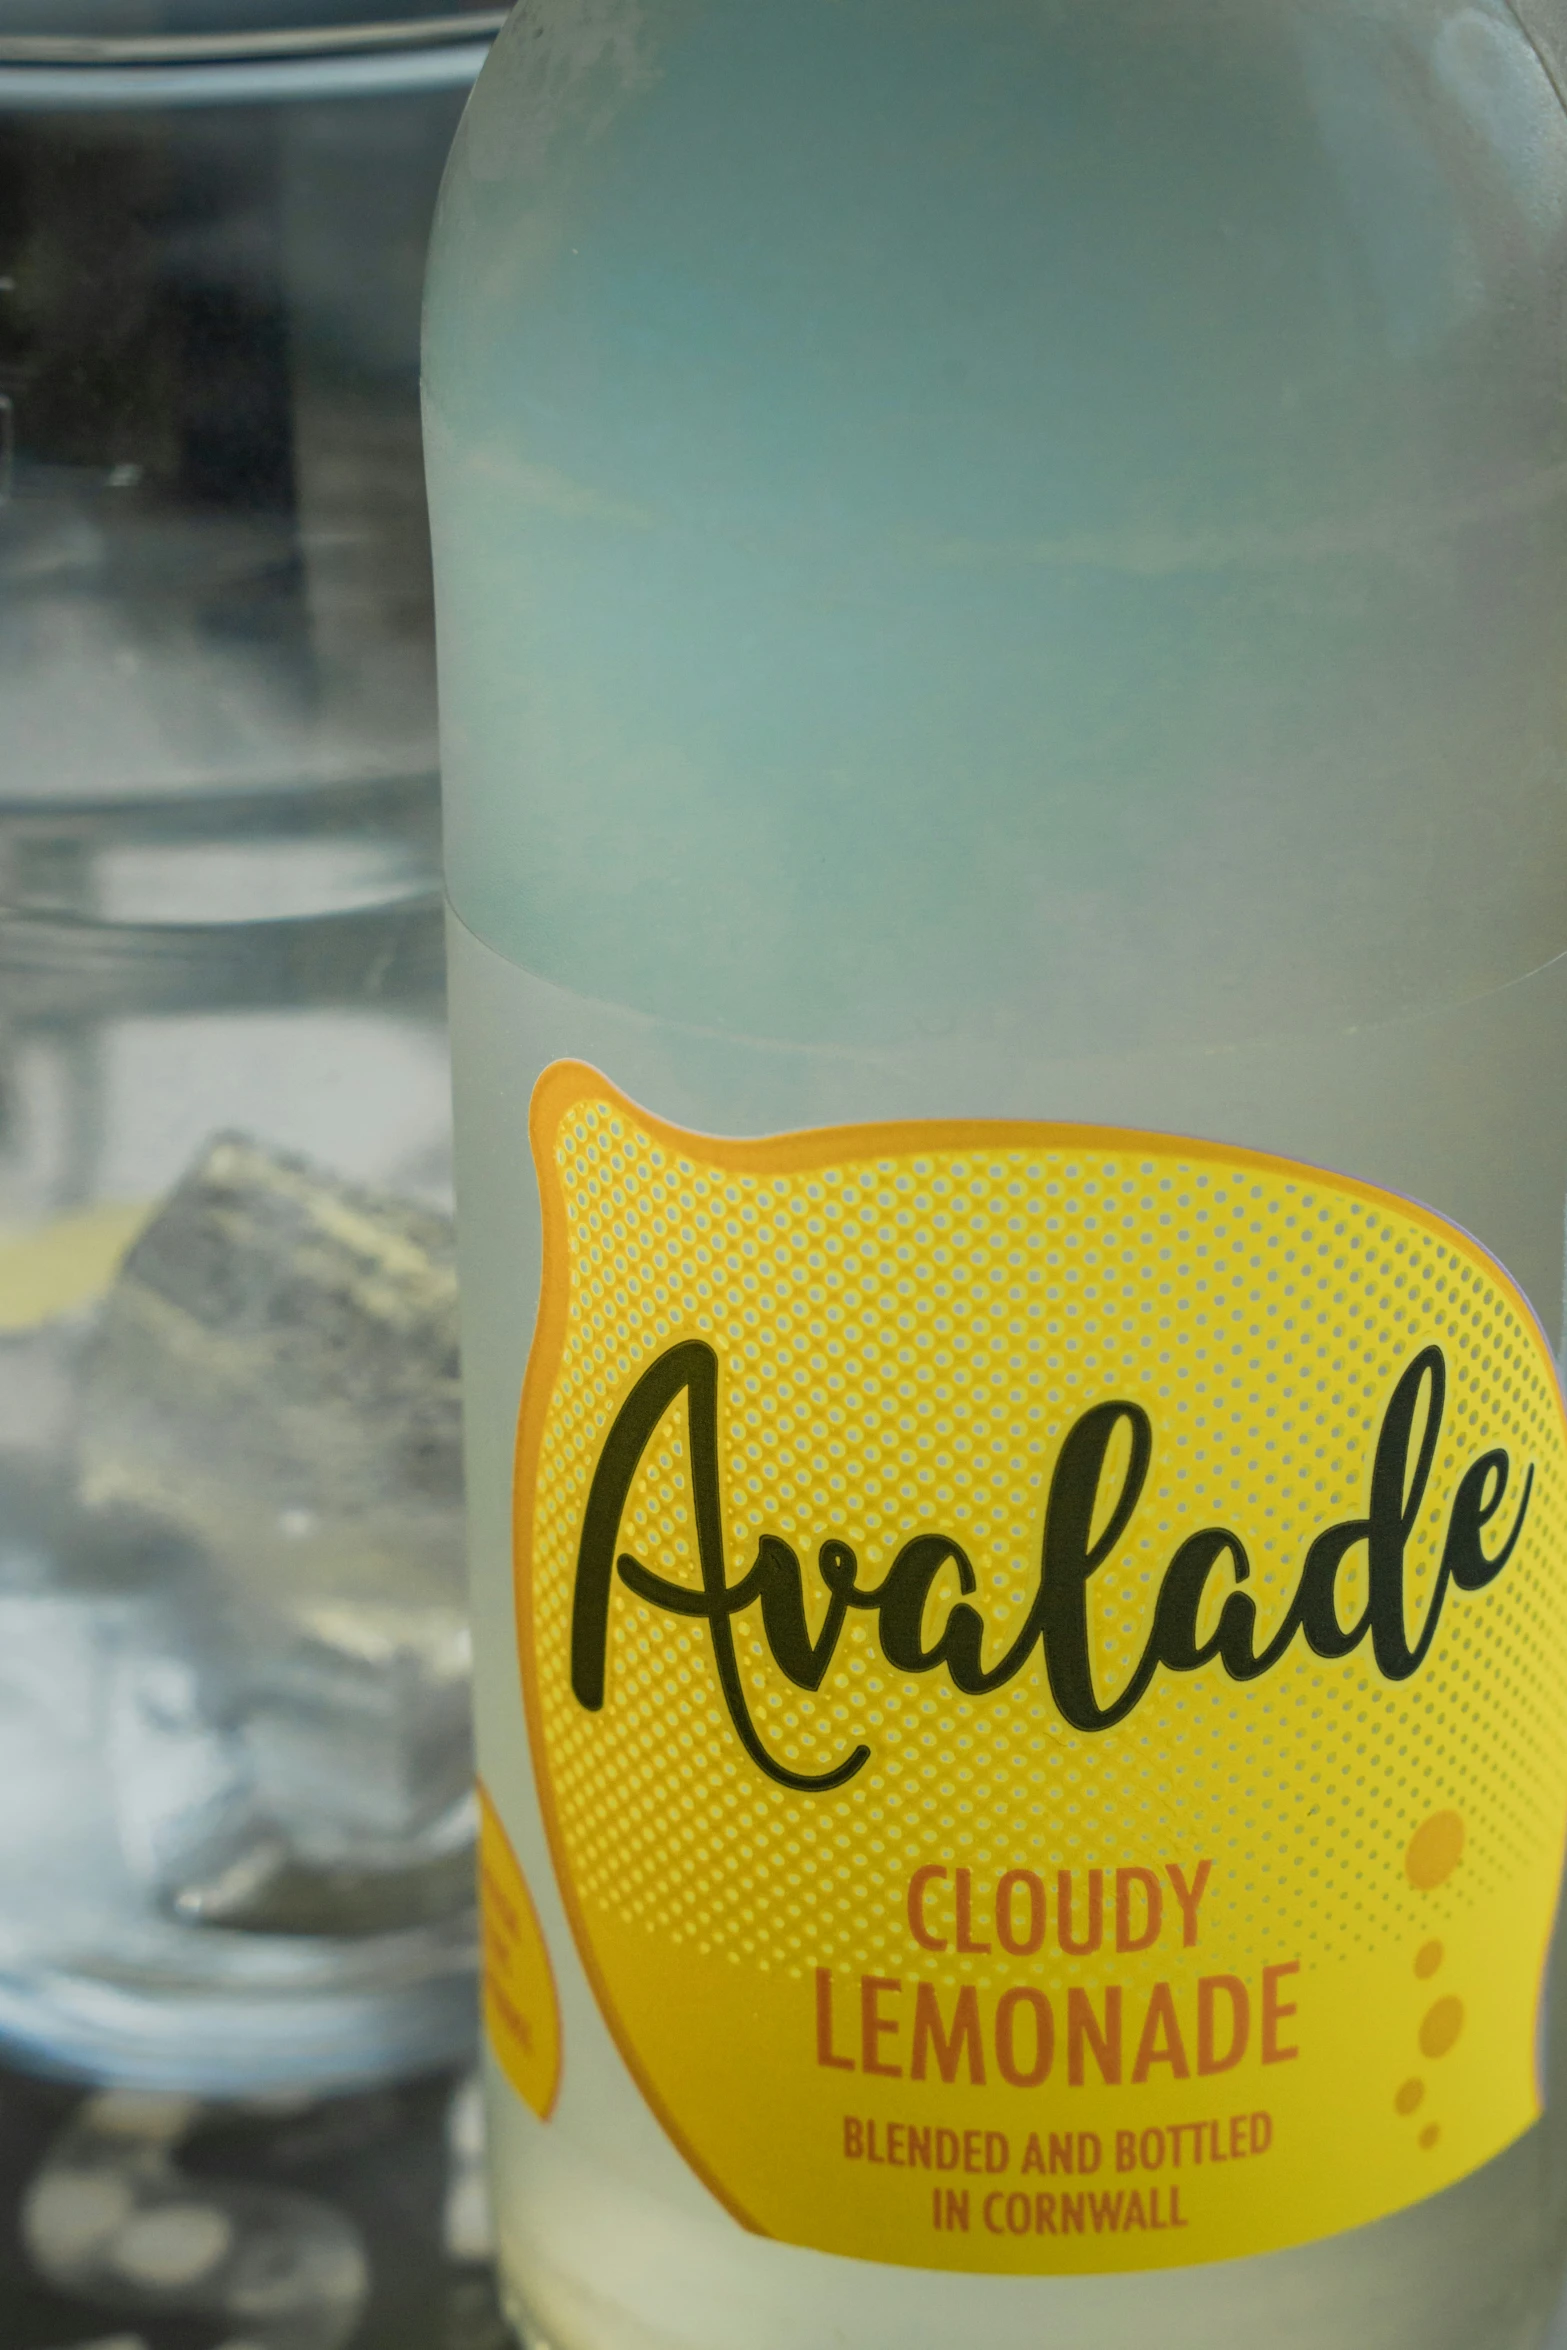 a close up of a plastic bottle with lemonade label on it